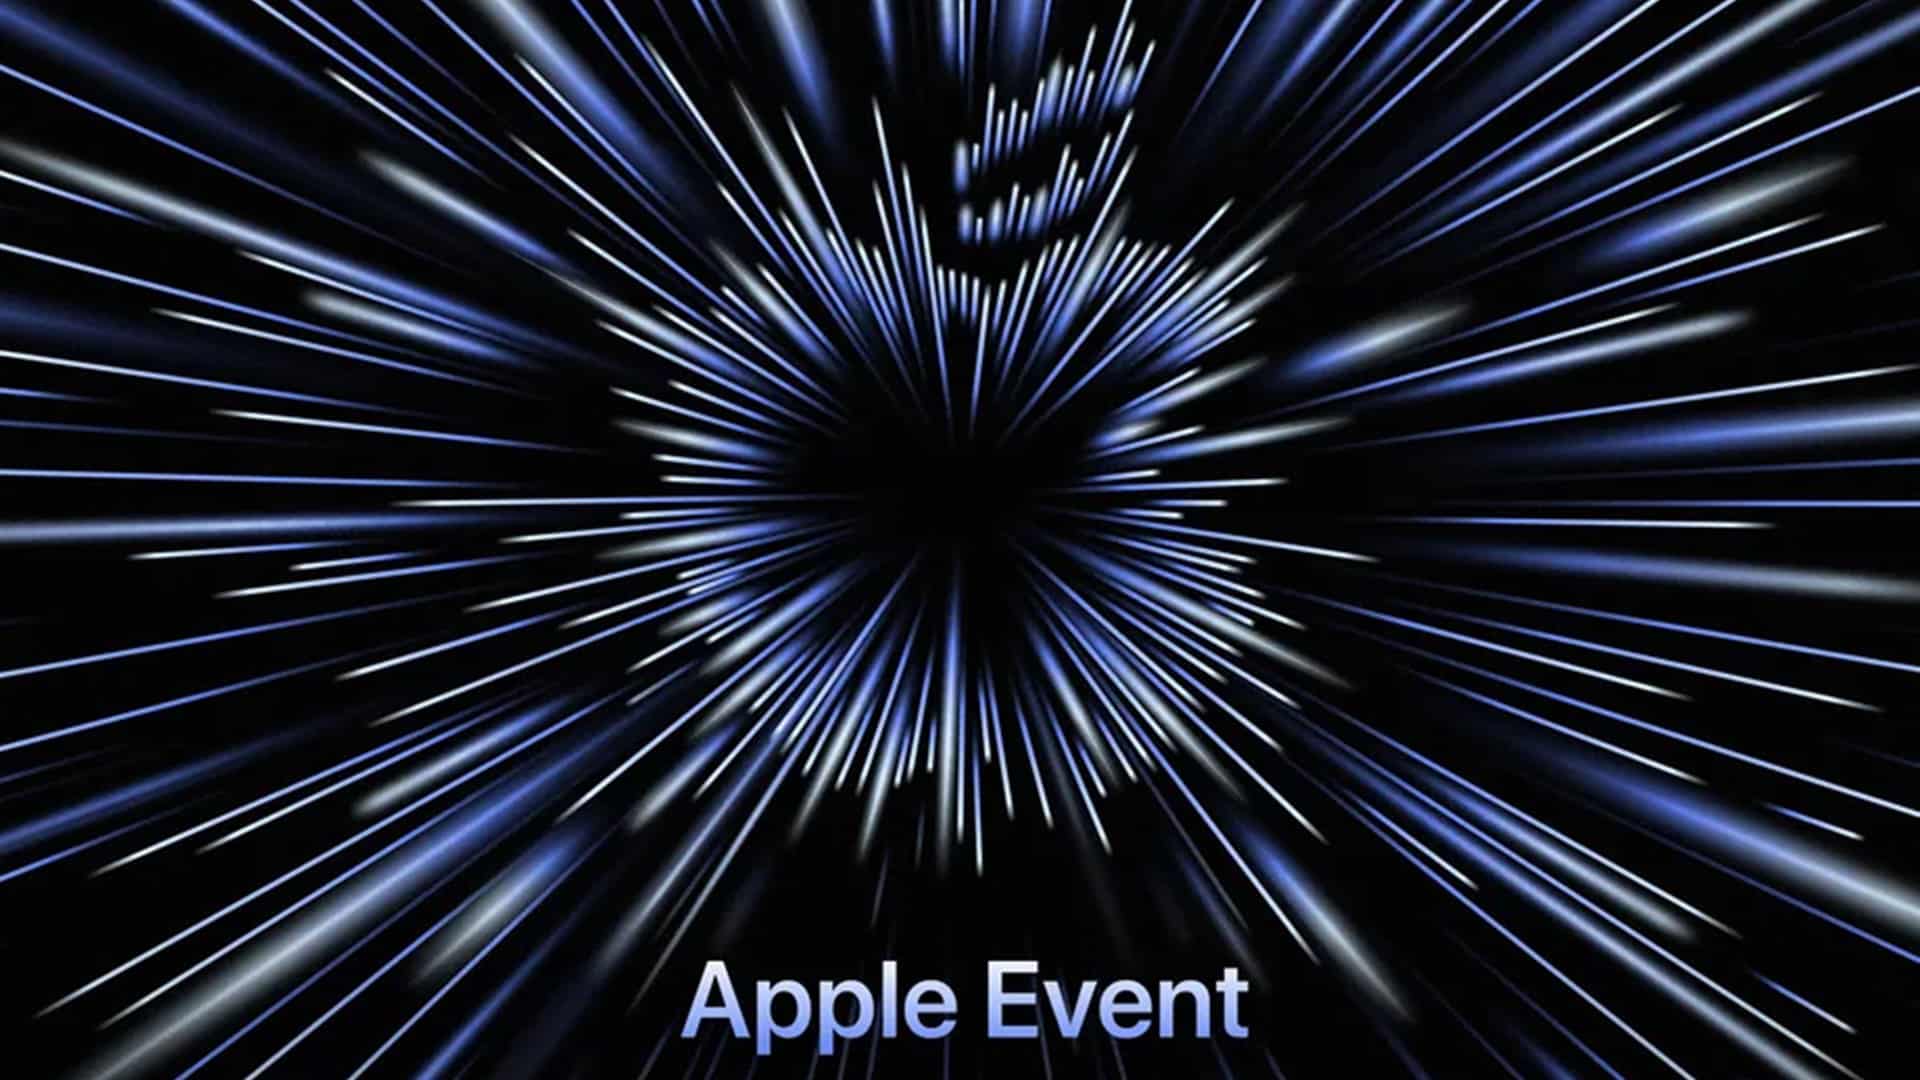 Apple 'Unleashed' event on October 18; What to expect